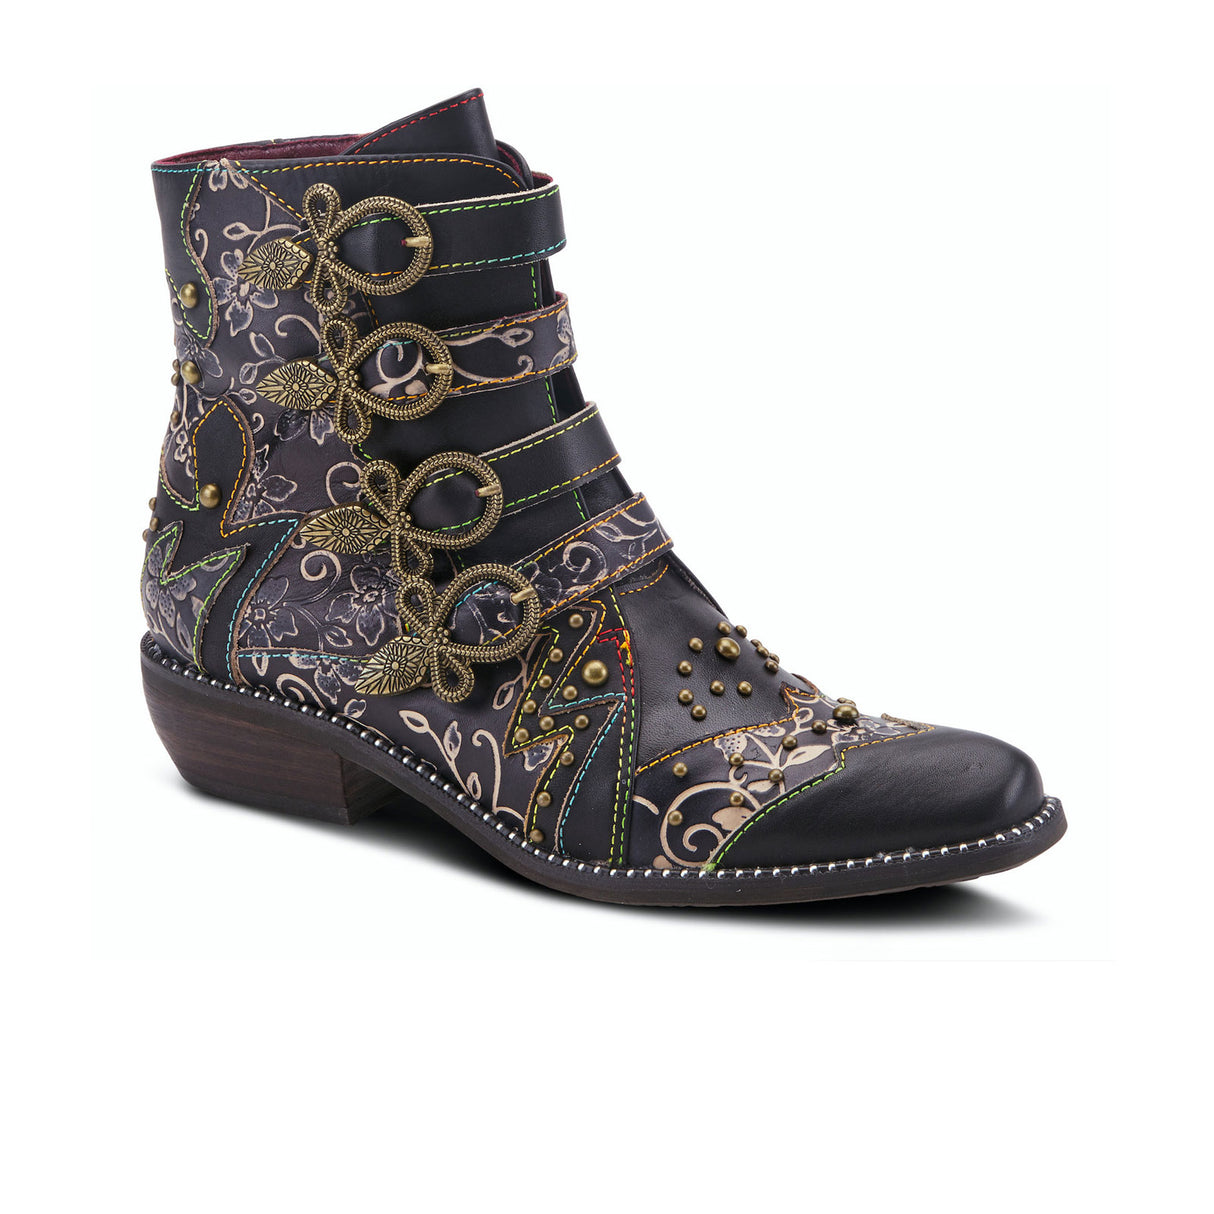 L'Artiste Rodeha Ankle Boot (Women) - Black Boots - Fashion - Ankle Boot - The Heel Shoe Fitters